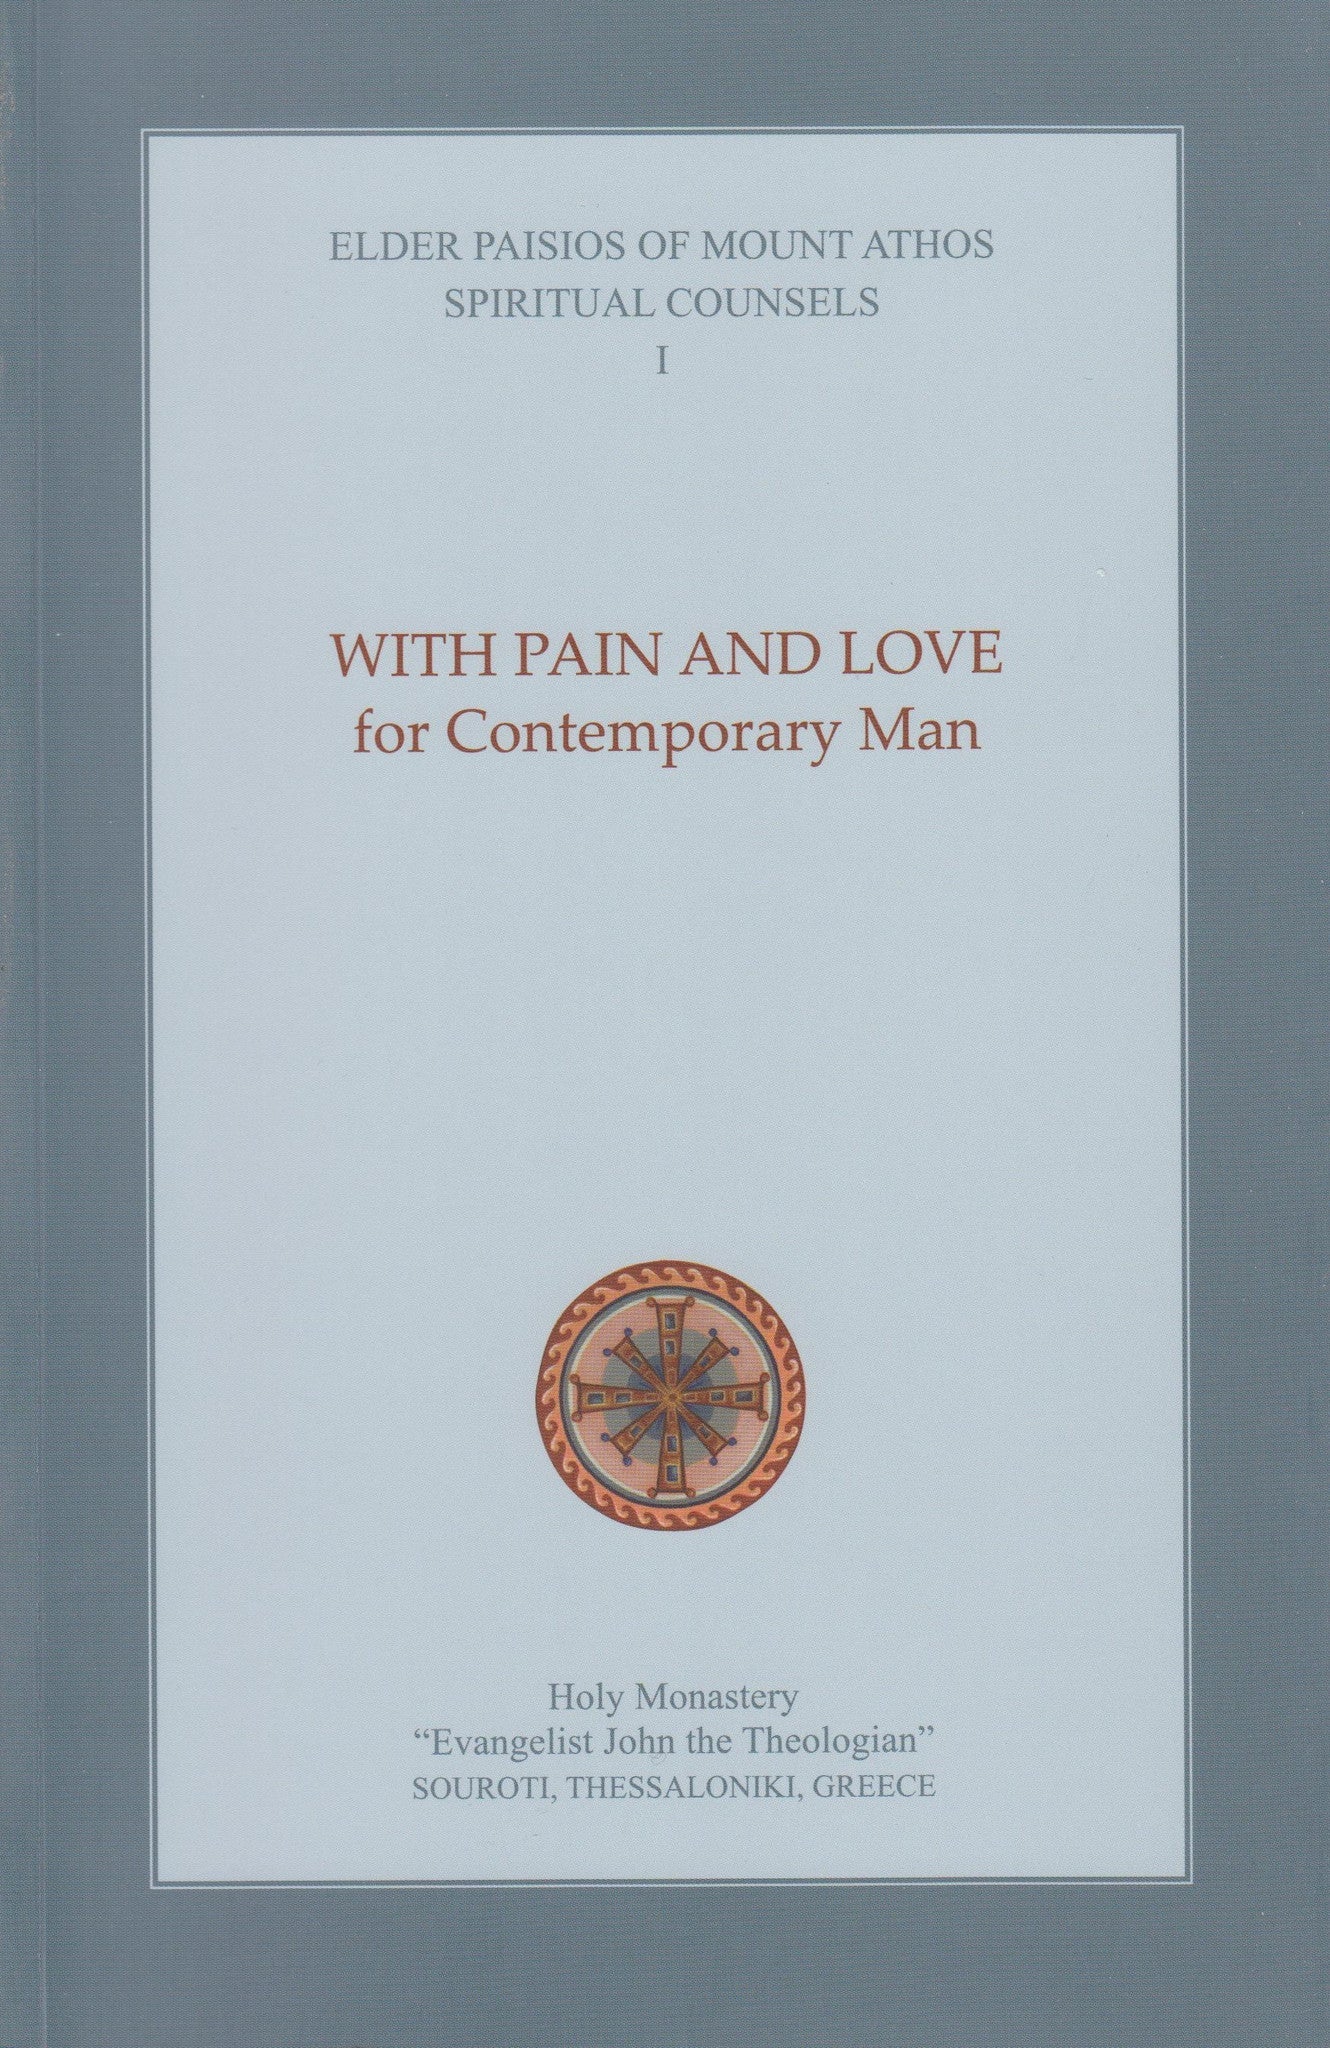 Vol. 1 - With Pain and Love for Contemporary Man (Elder Paisios) - Holy Cross Monastery